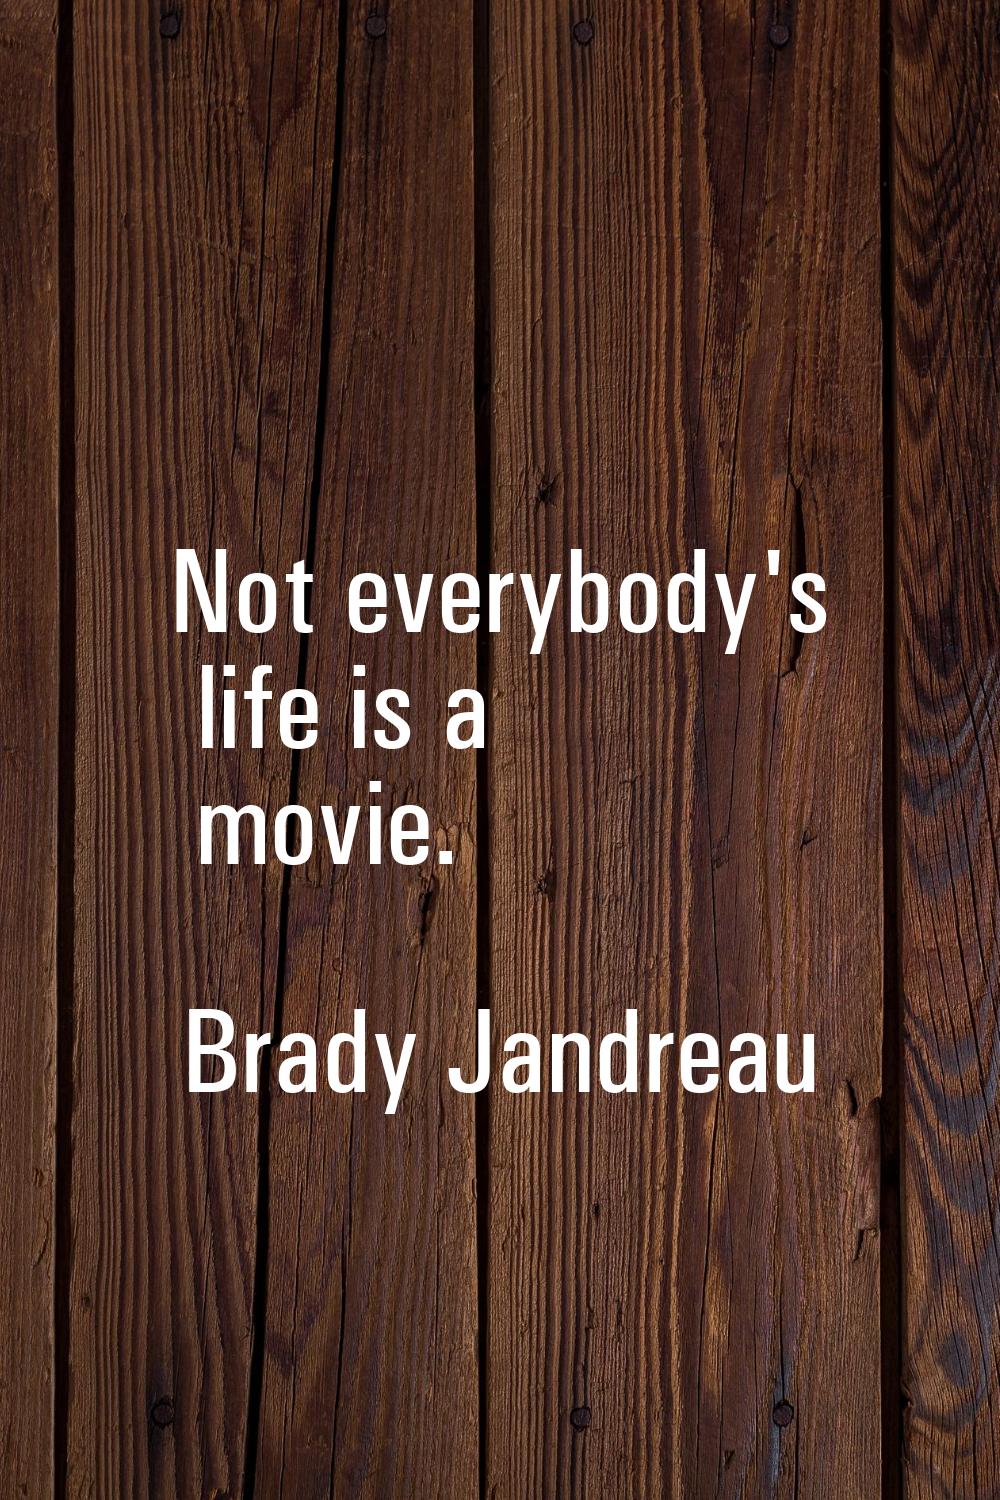 Not everybody's life is a movie.